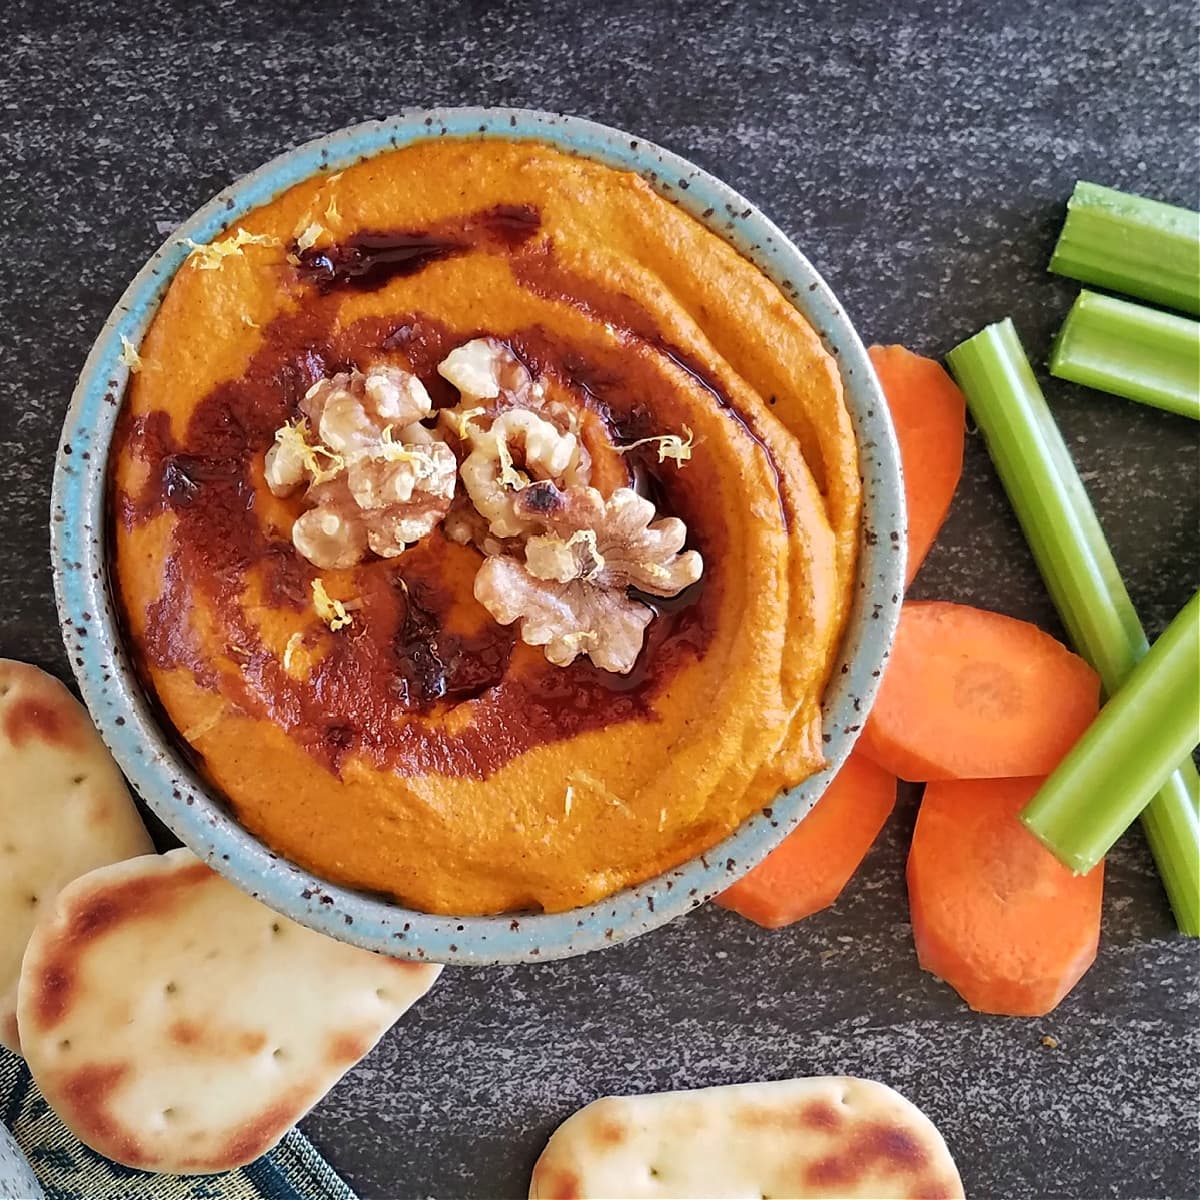 red pepper and walnut dip in a bowl wiith carrots and aspergus slices